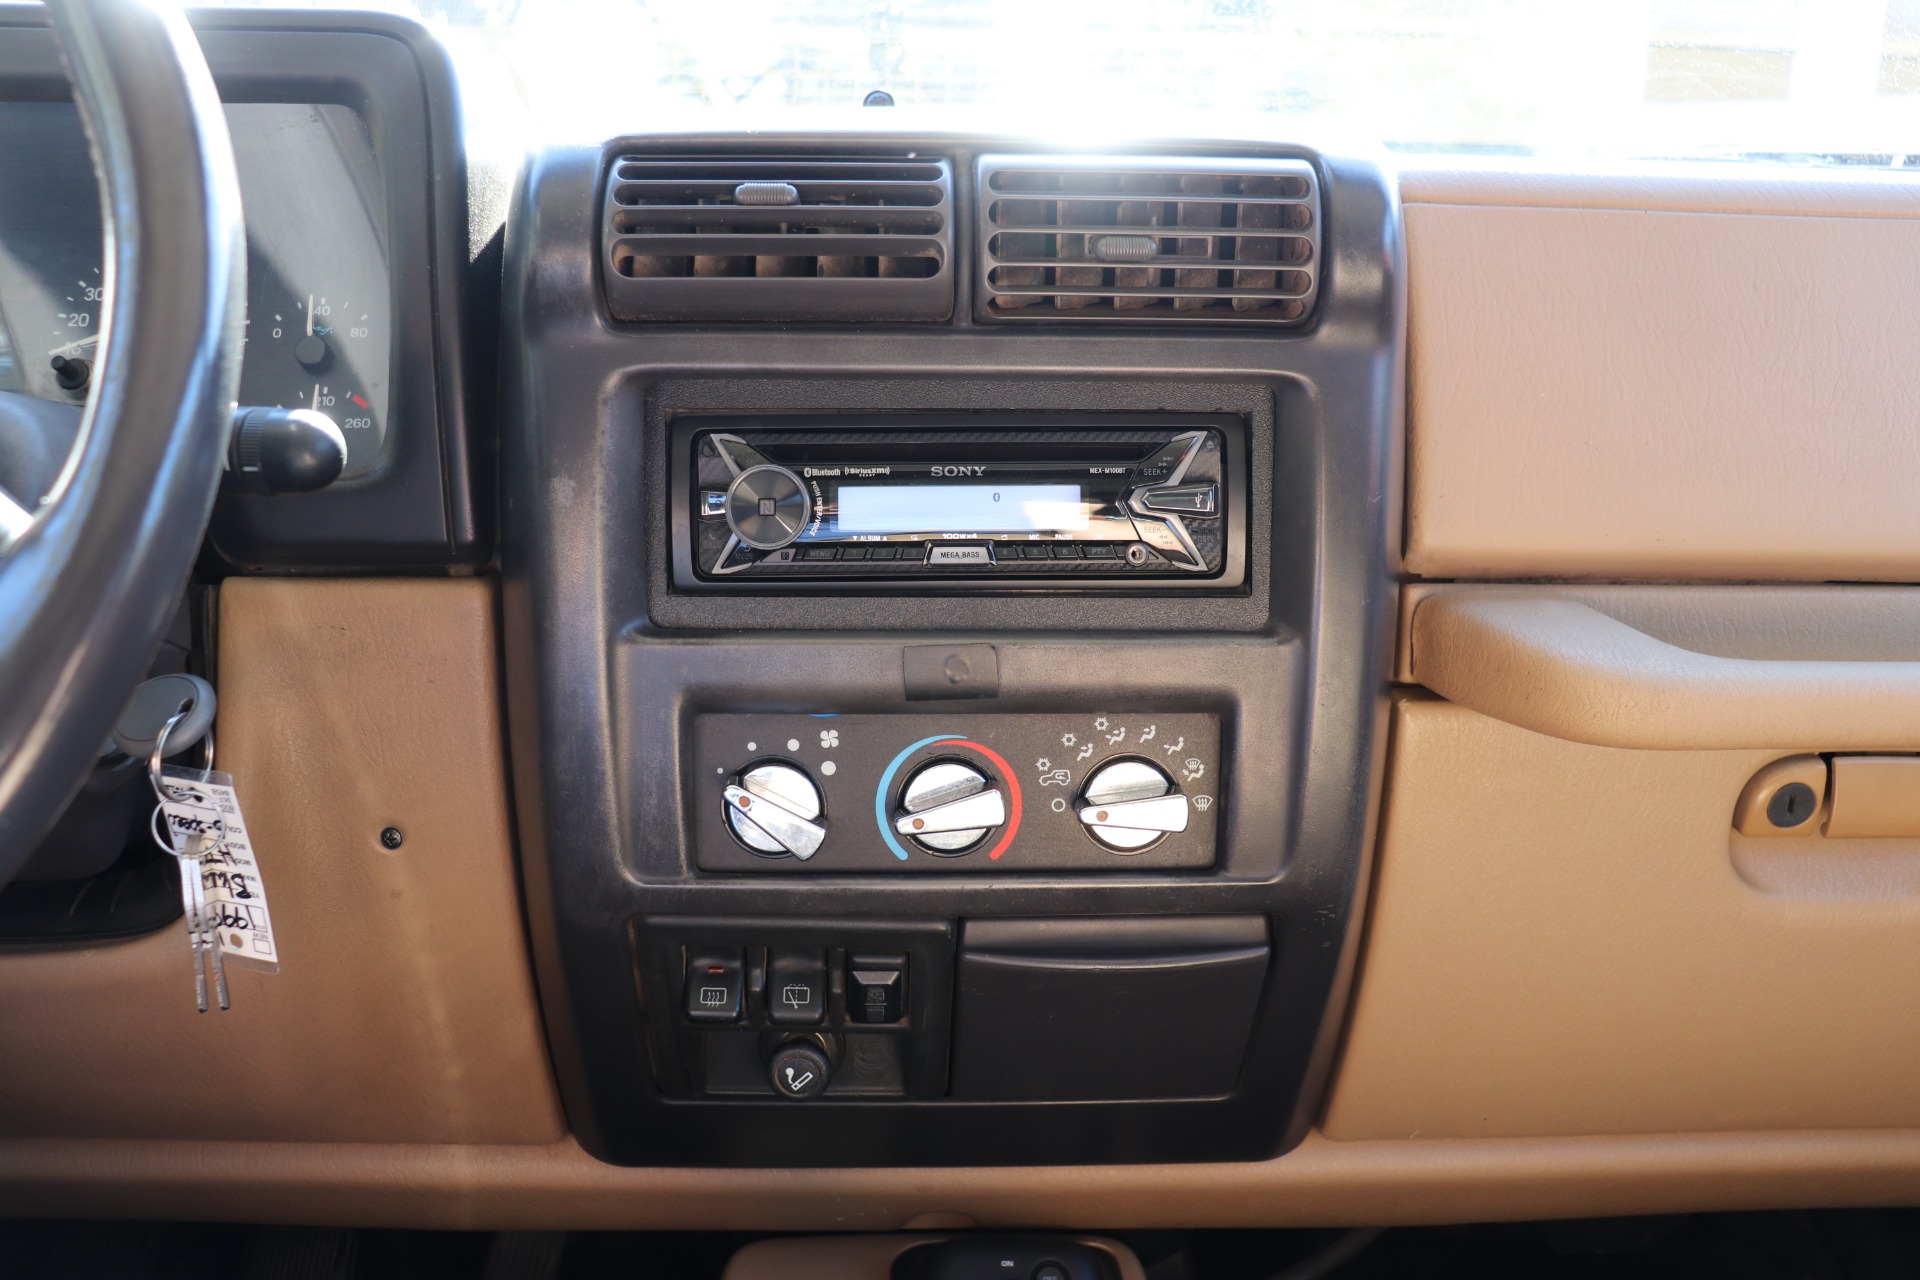 Used 1999 Jeep Wrangler Sport For Sale ($14,995) | Select Jeeps Inc. Stock  #430397